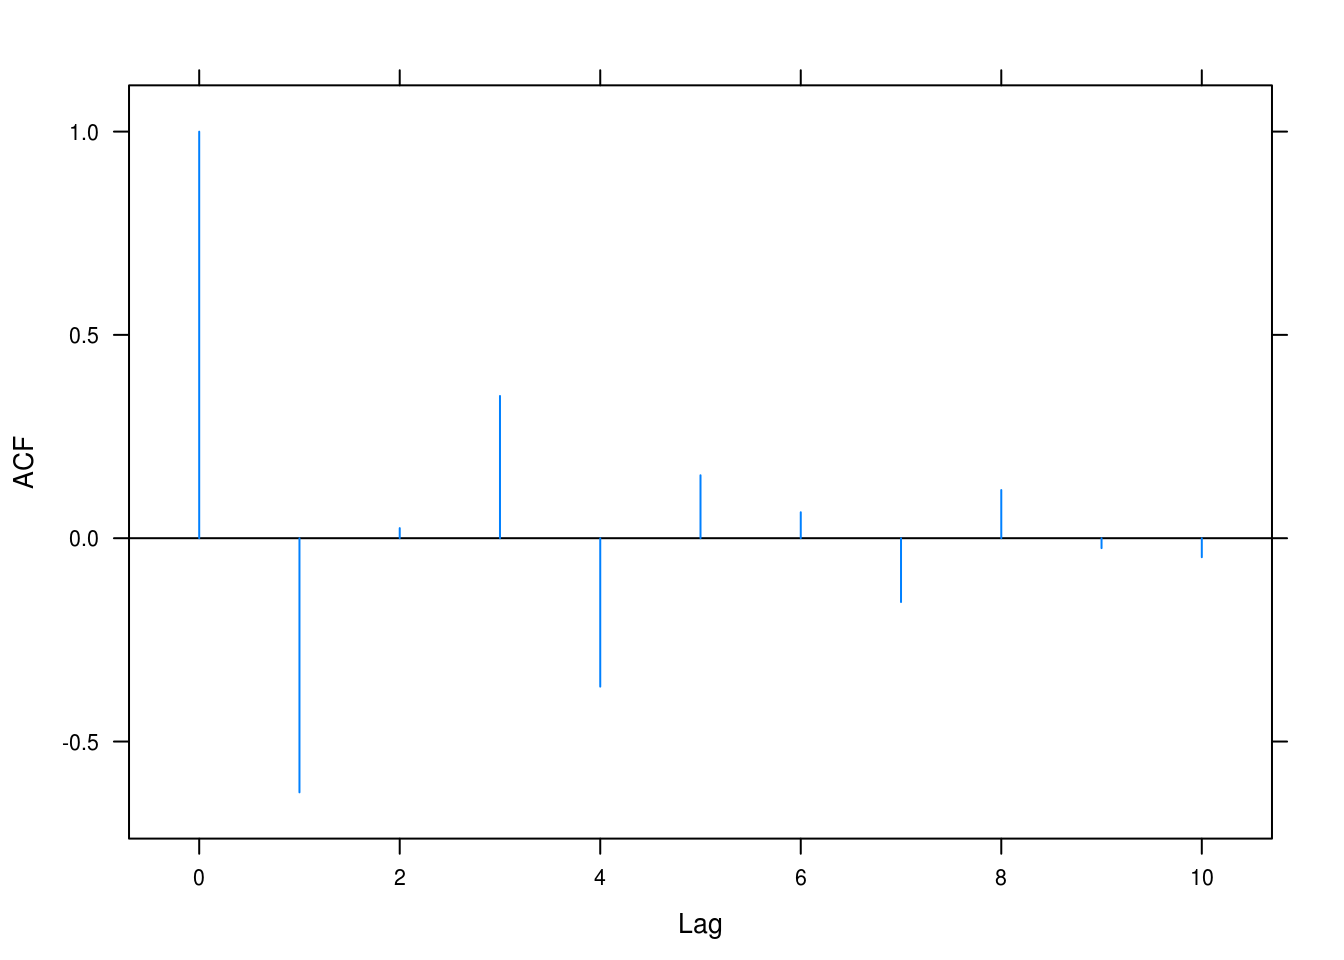 ACF for AR(2) with $\phi_1 = -1, \phi_2 = -0.6$.